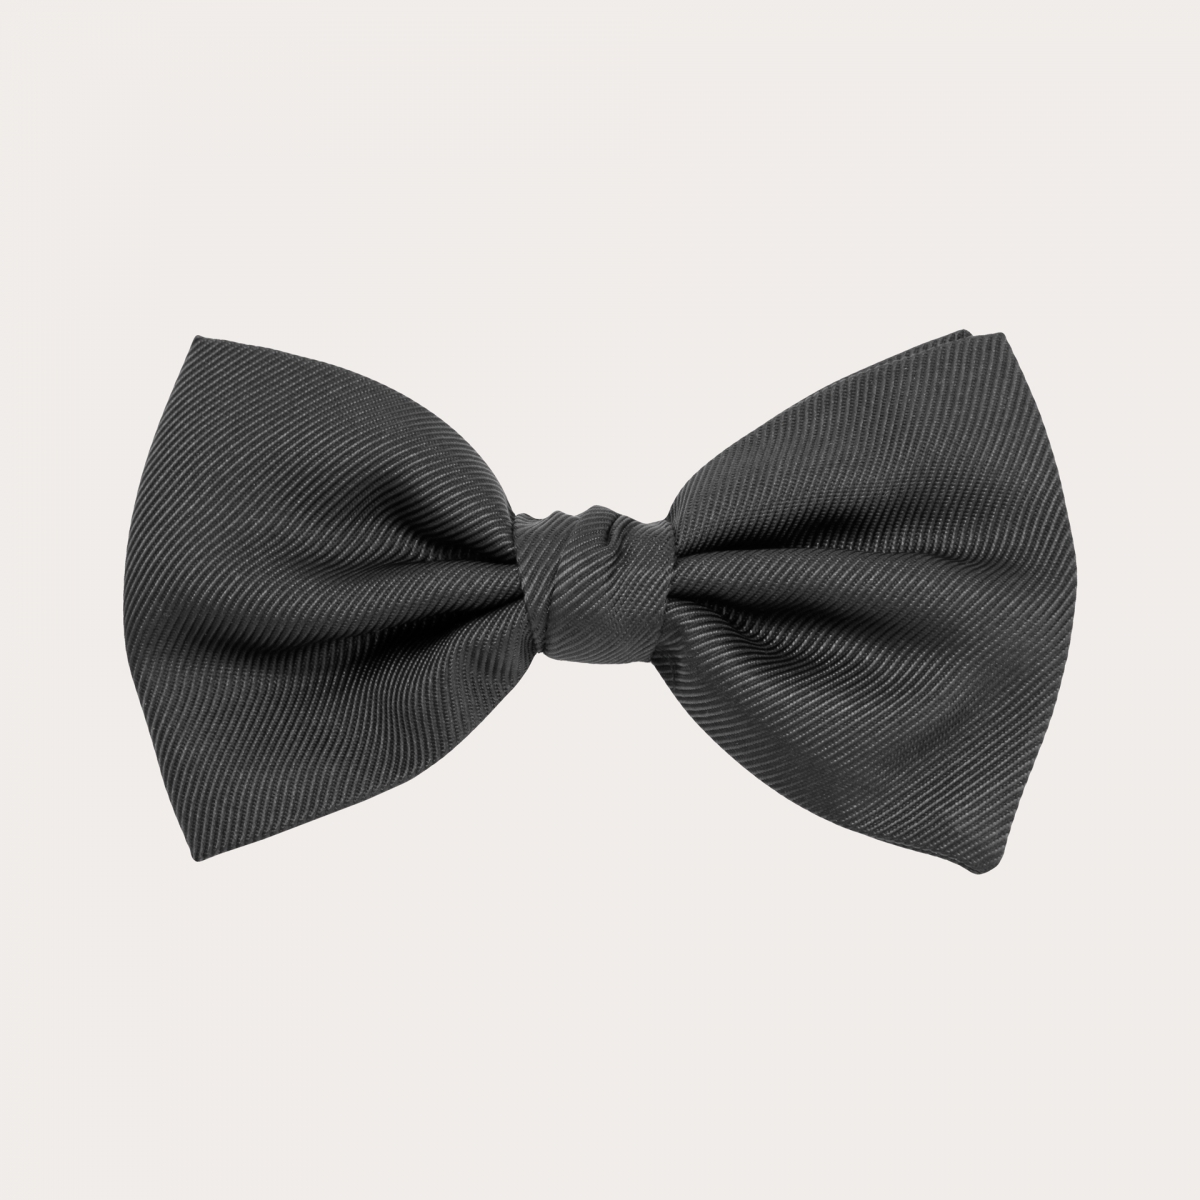 BRUCLE Silk bow tie, anthracite grey